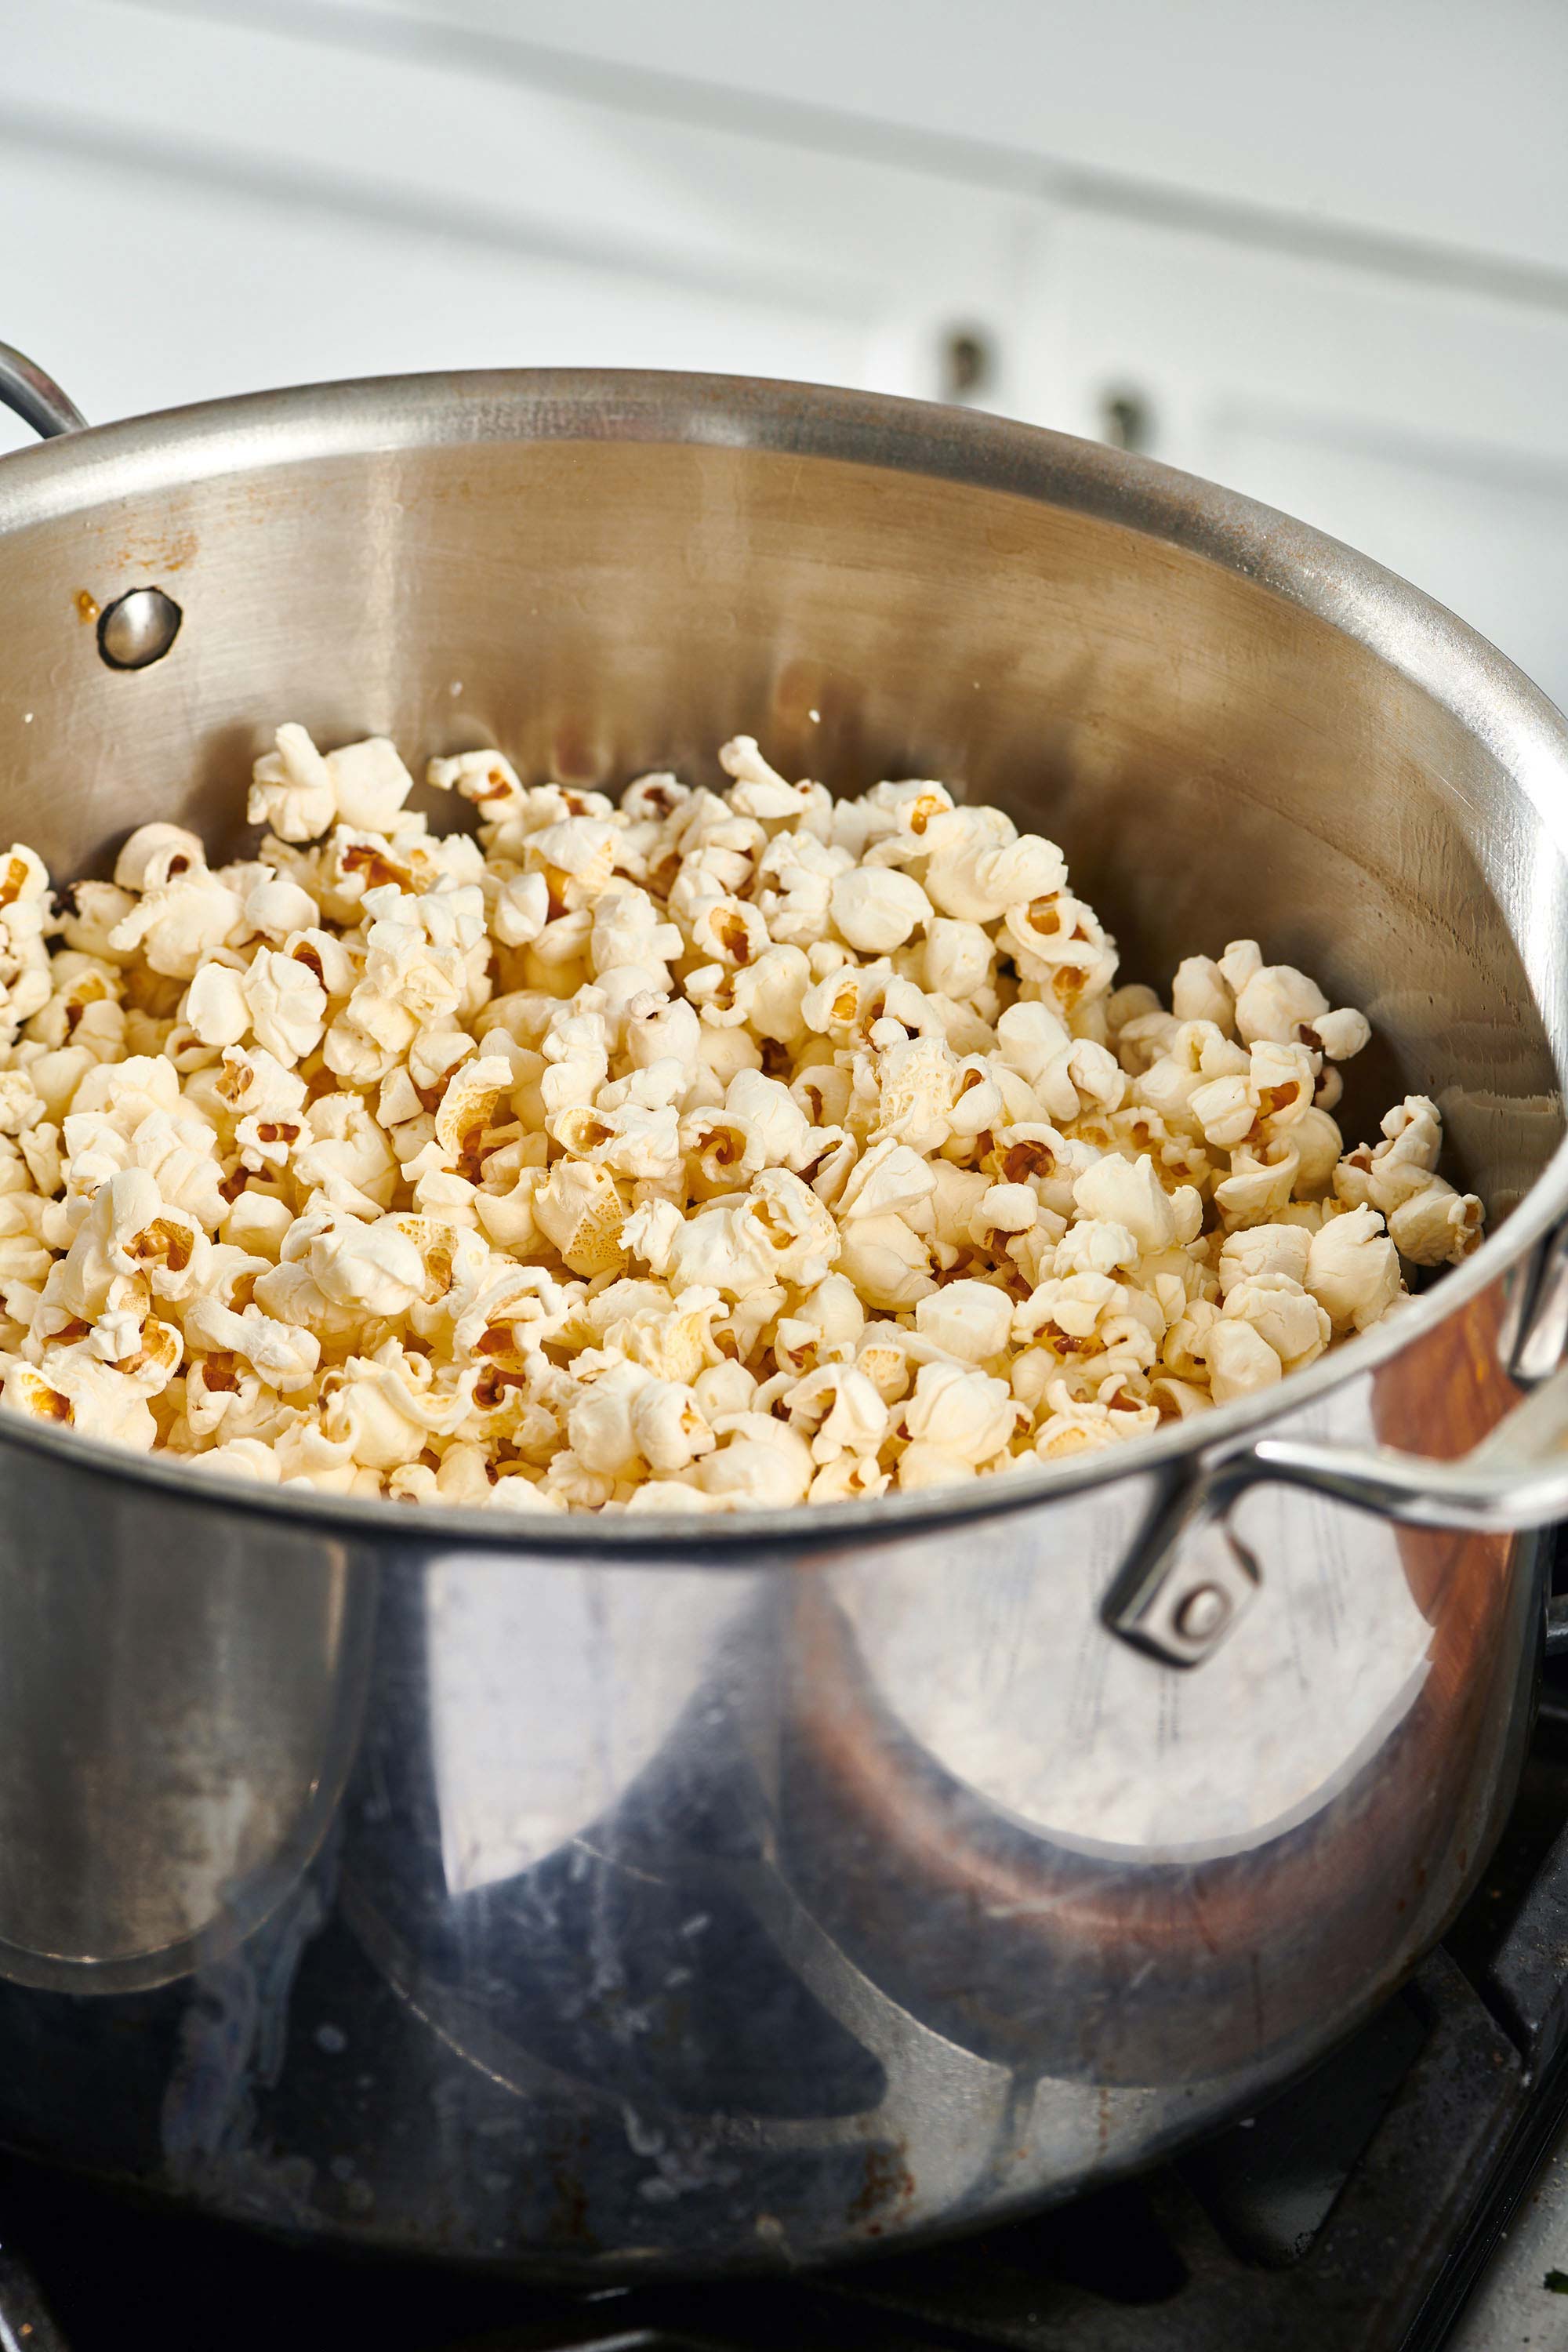 Popcorn in a pot on the stove.